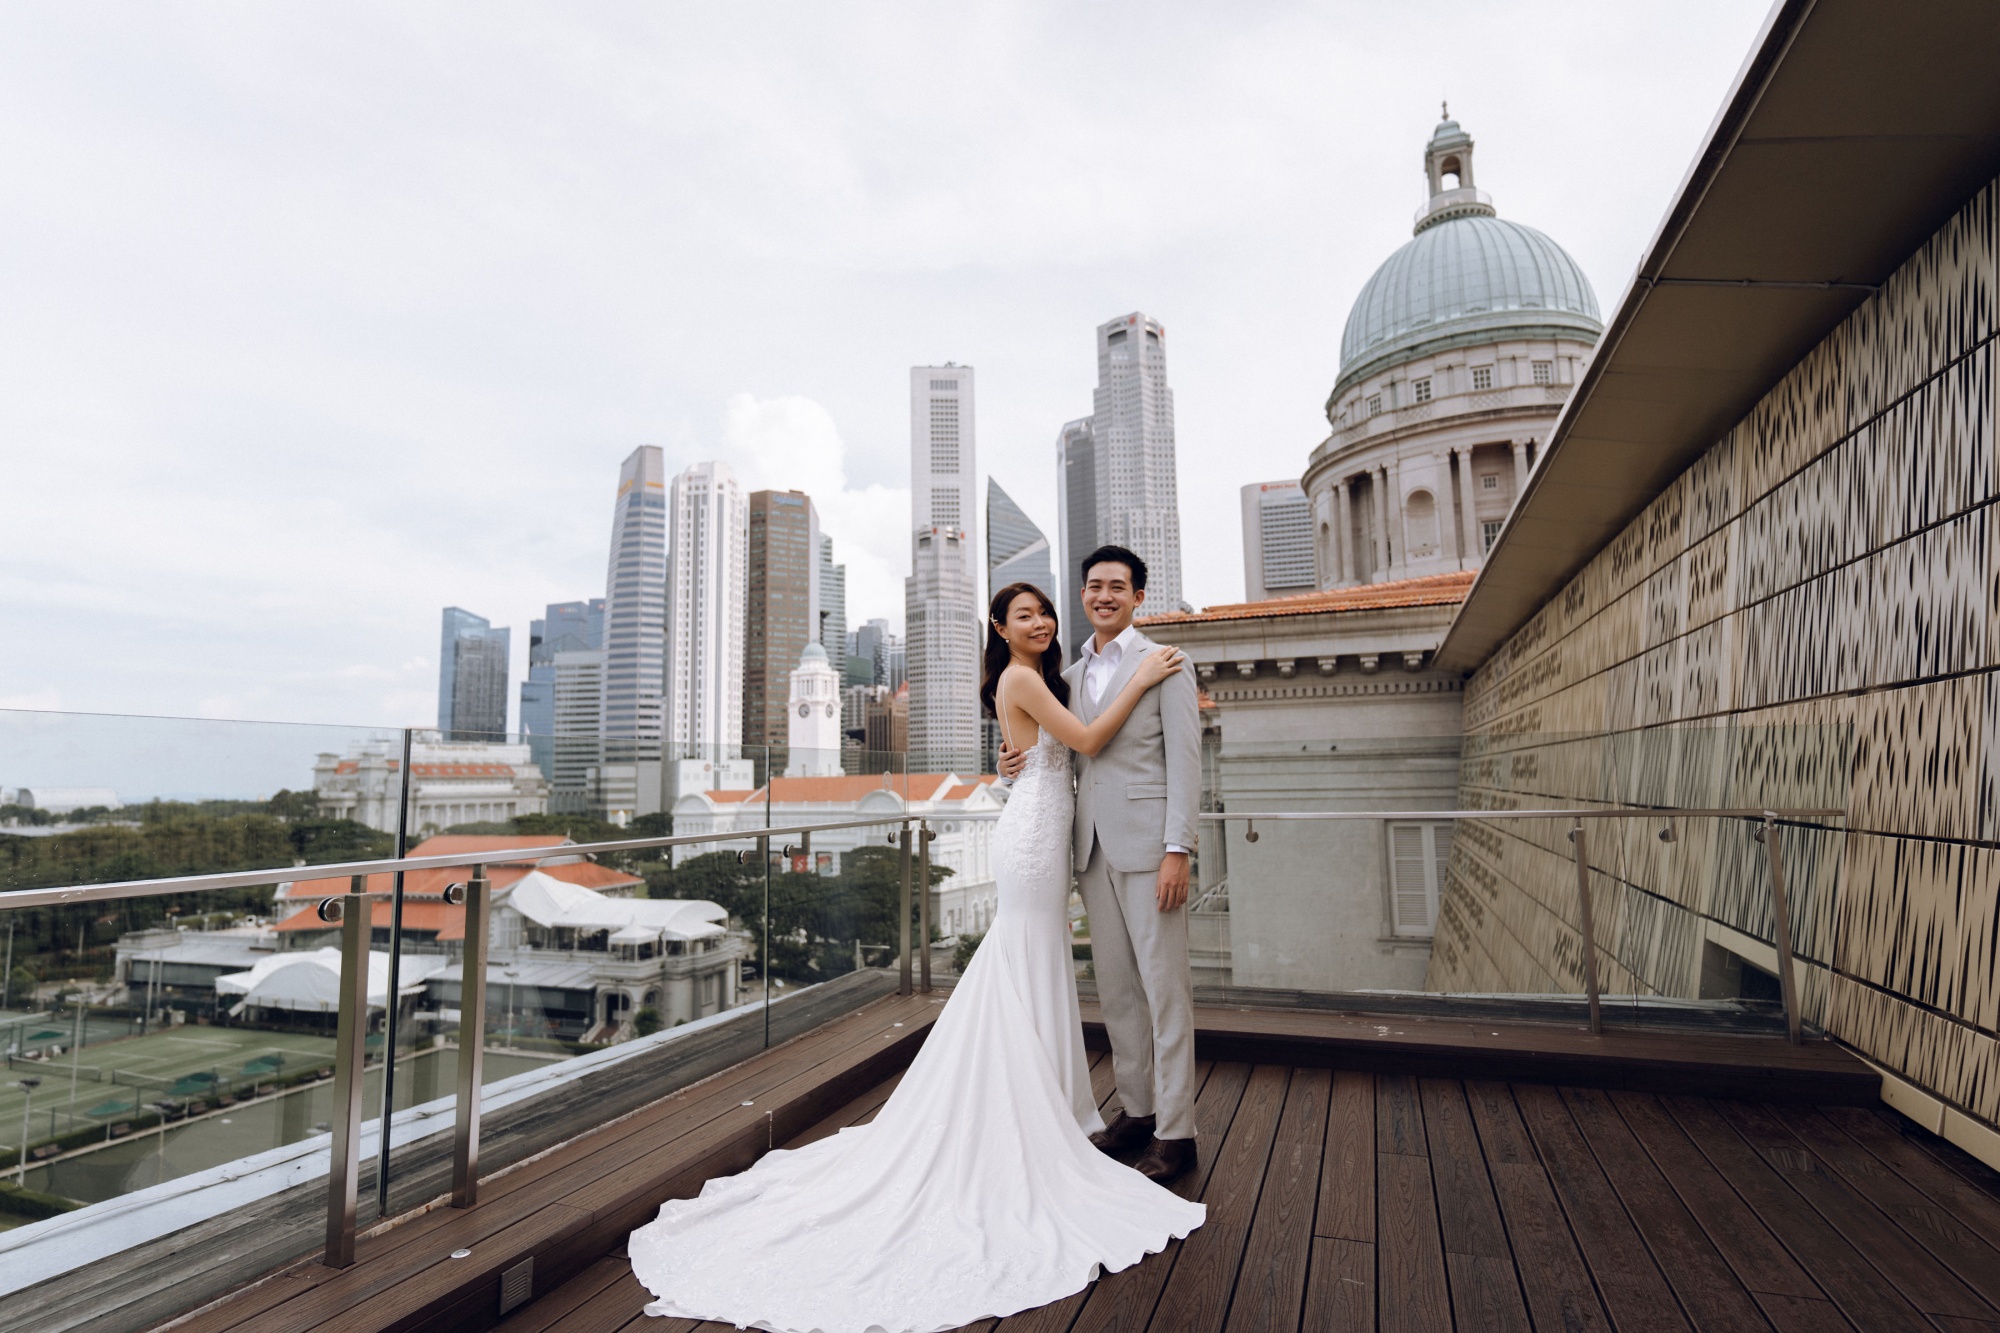 Prewedding Photoshoot At National Gallery And Armenian Street Carpet Shop by Samantha on OneThreeOneFour 1